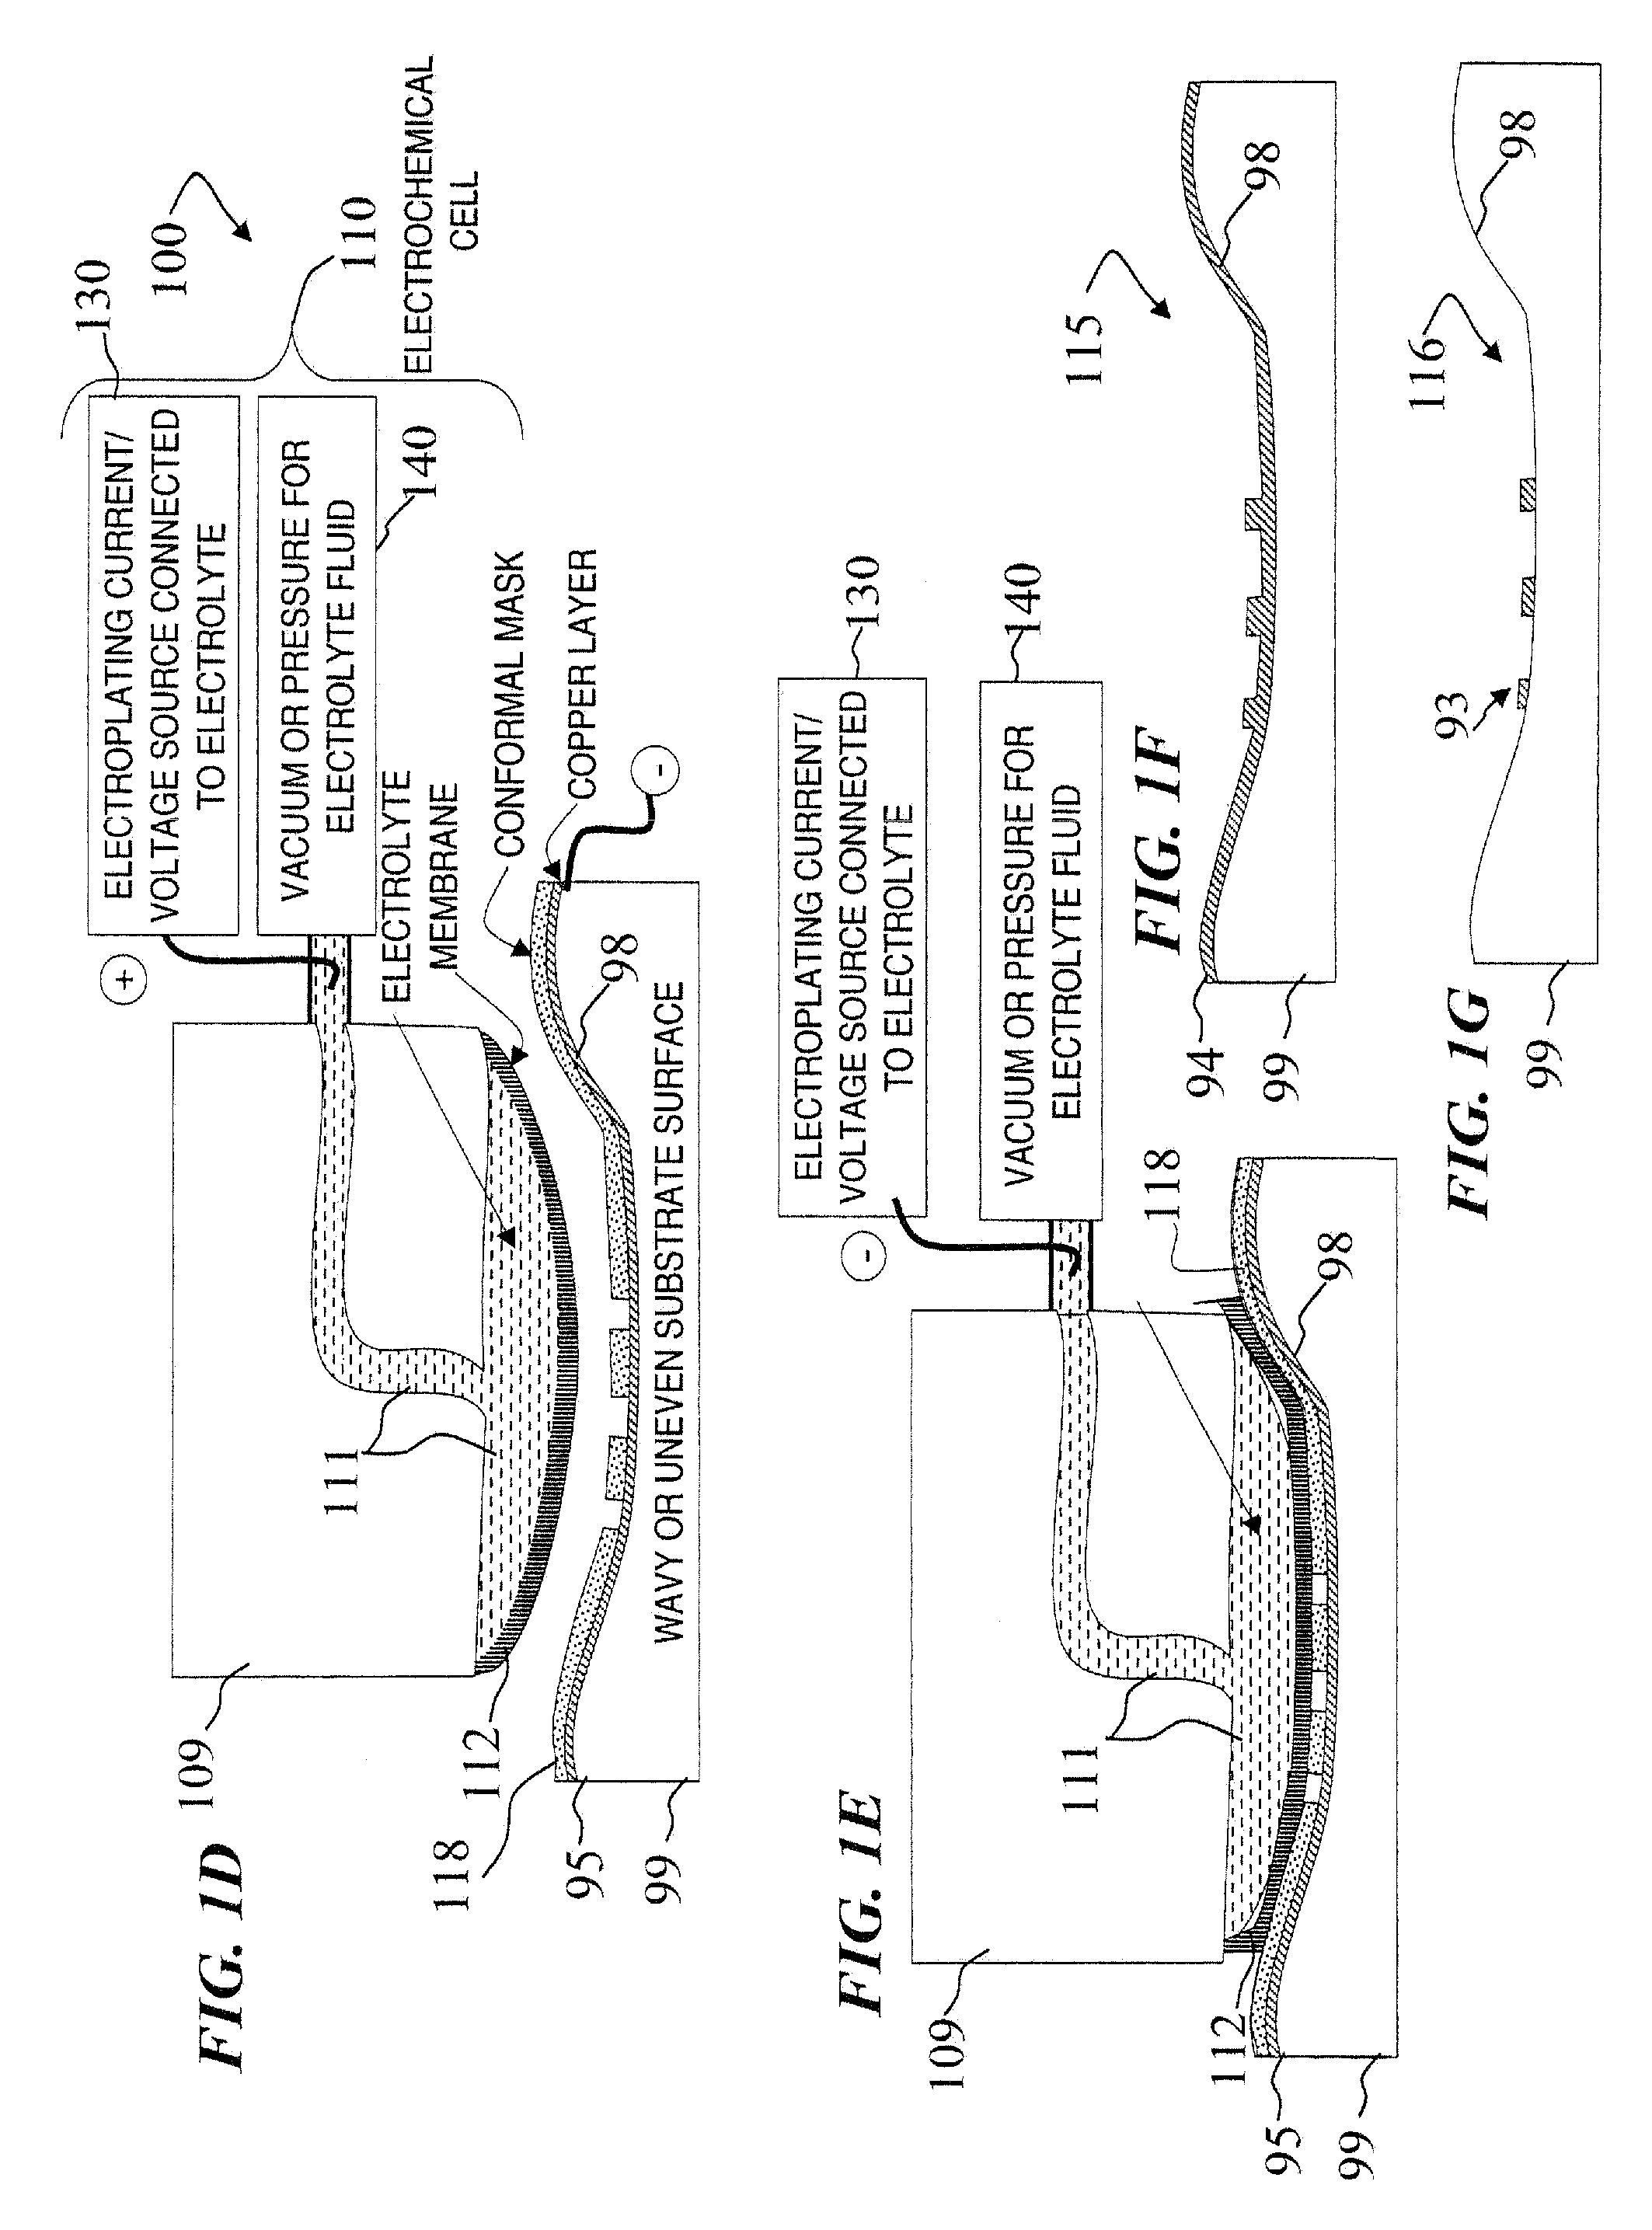 Apparatus for focused electric-field imprinting for micron and sub-micron patterns on wavy or planar surfaces